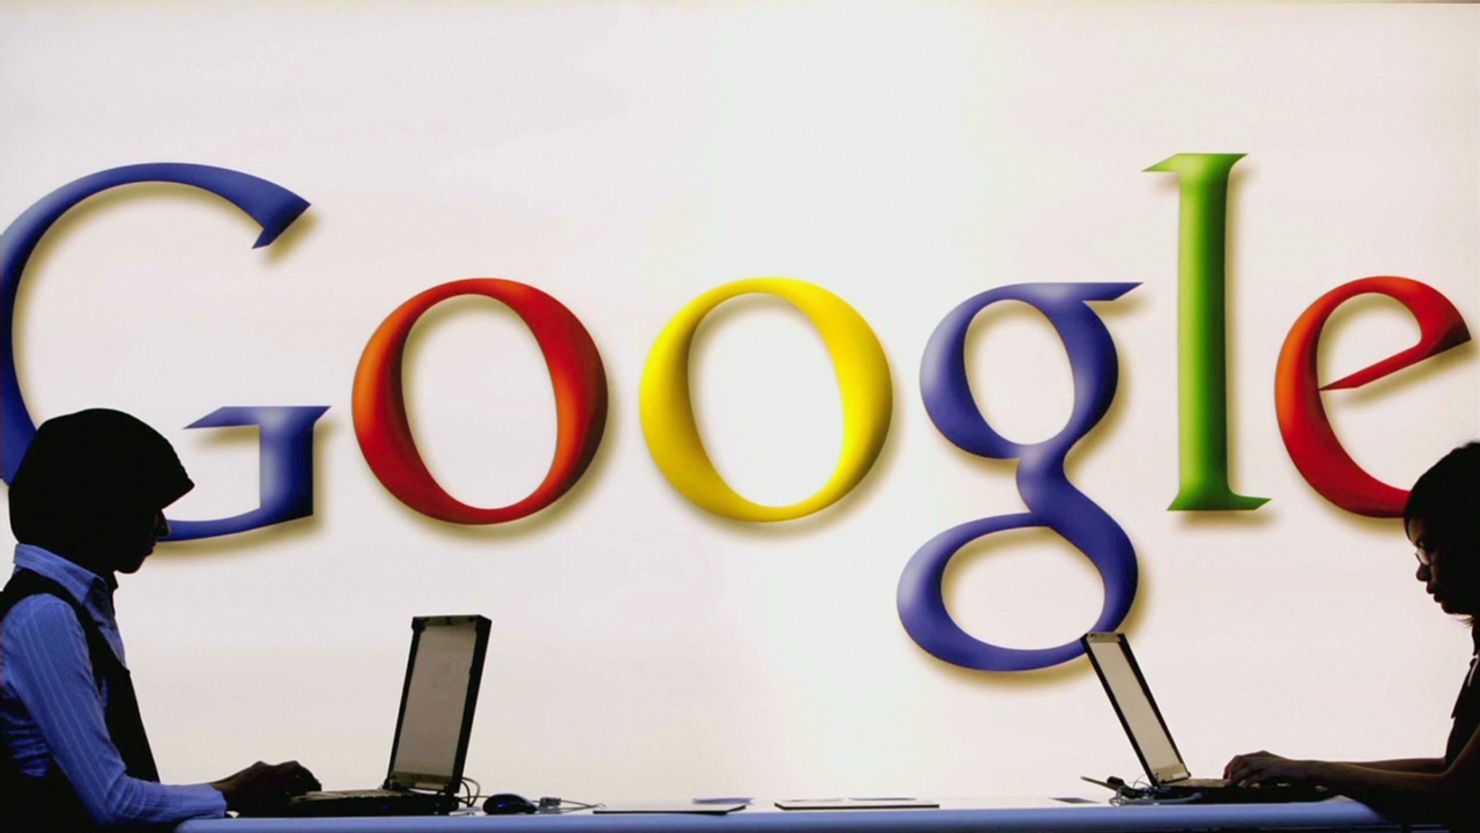 U.S. tech giant Google said that its privacy policy respected European law.